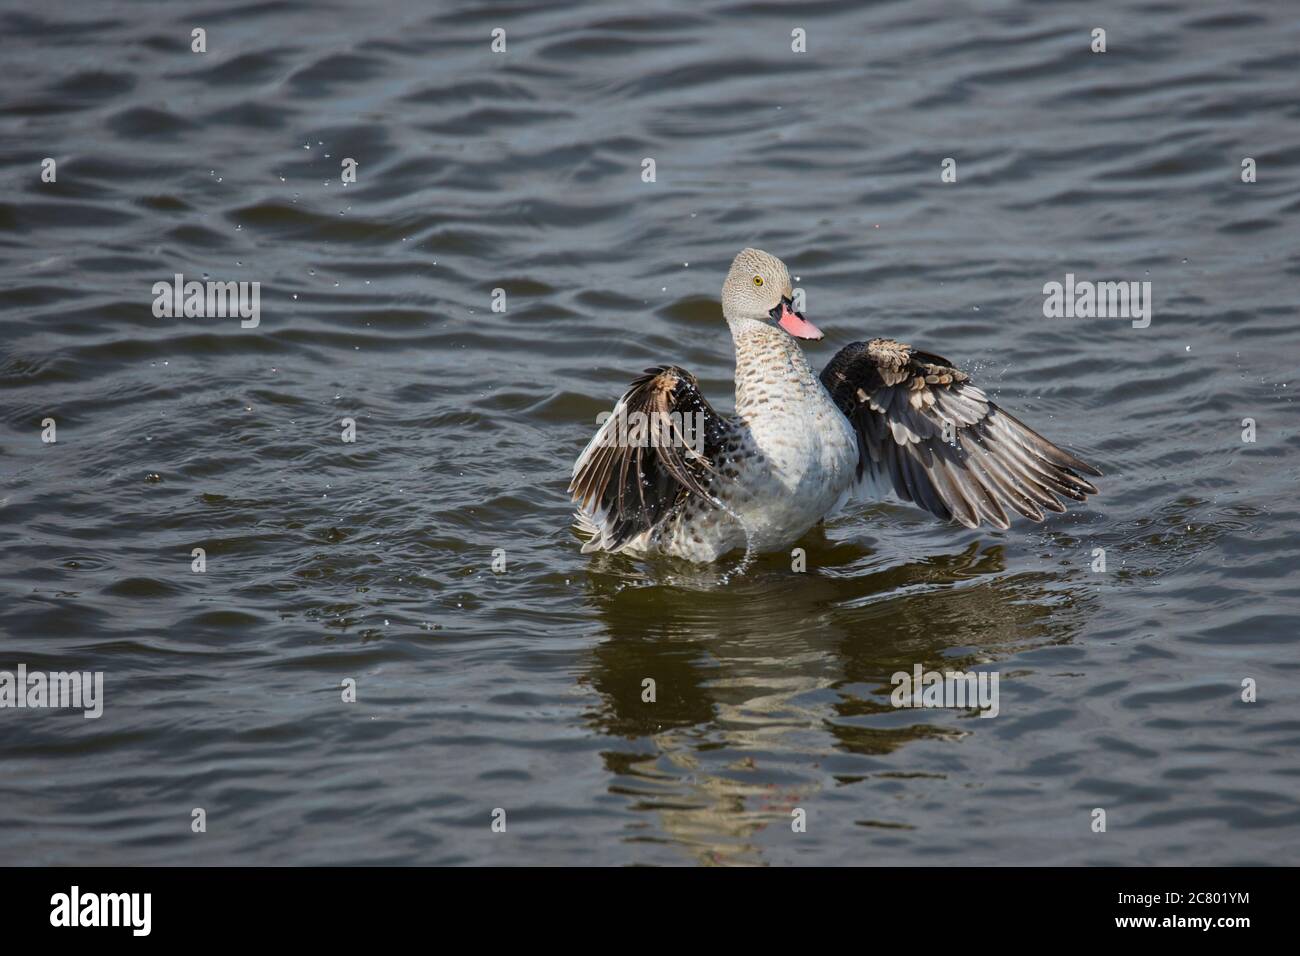 Cape teal (Anas capensis) standing Near water. Teals are dabbling ducks that filter water through their bills to feed on plant and animal matter. Phot Stock Photo